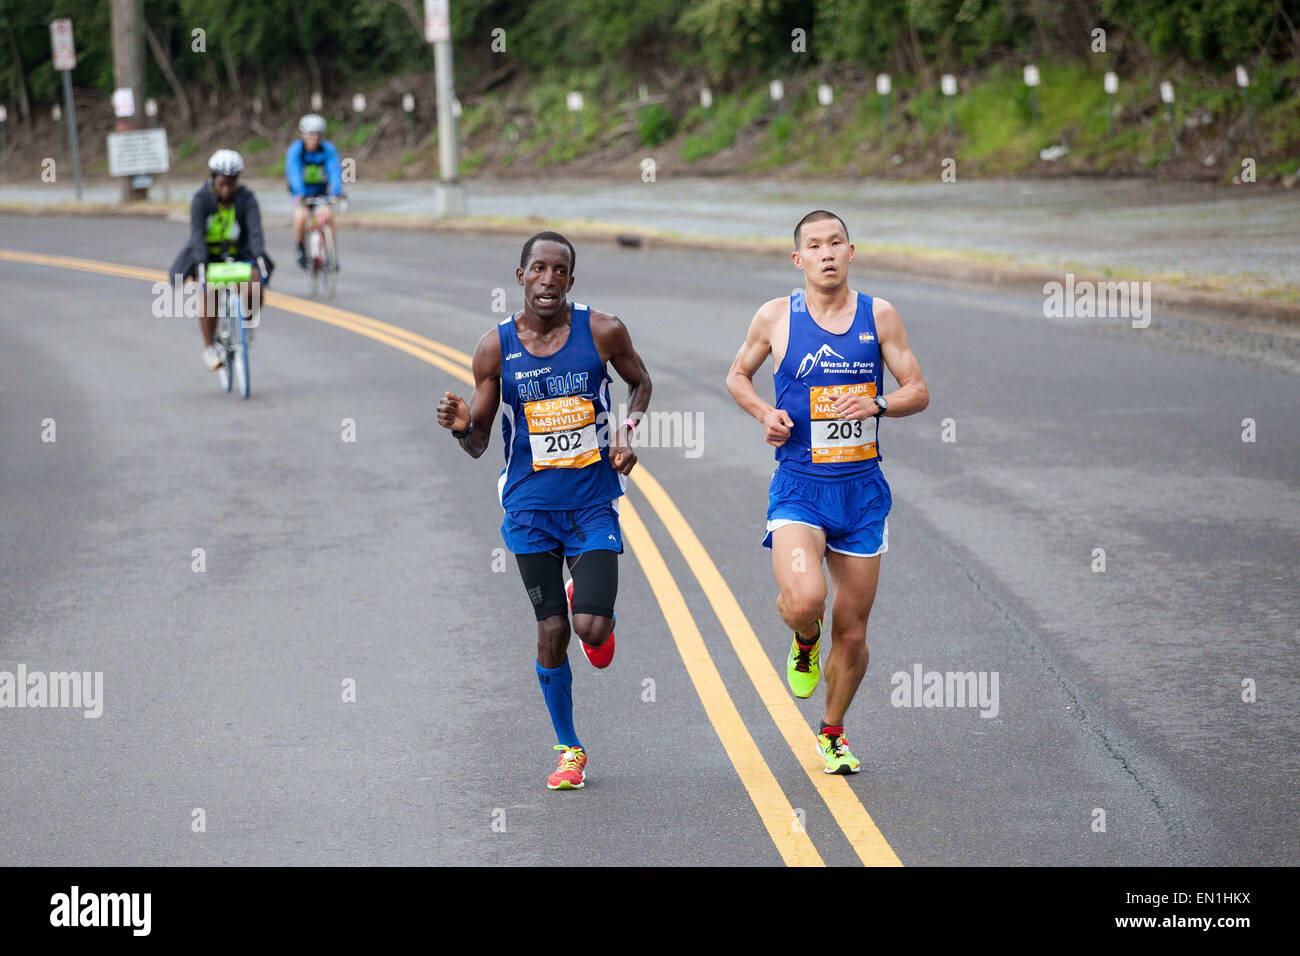 Nashville, Tennessee, USA. 25th Apr, 2015. STEVE CHU (right, bib number 203) and ROOSEVELT COOK (left, bib number 202) compete during the final stretch of the St. Jude Country Music Half Marathon. © Raffe Lazarian/ZUMA Wire/ZUMAPRESS.com/Alamy Live News Stock Photo